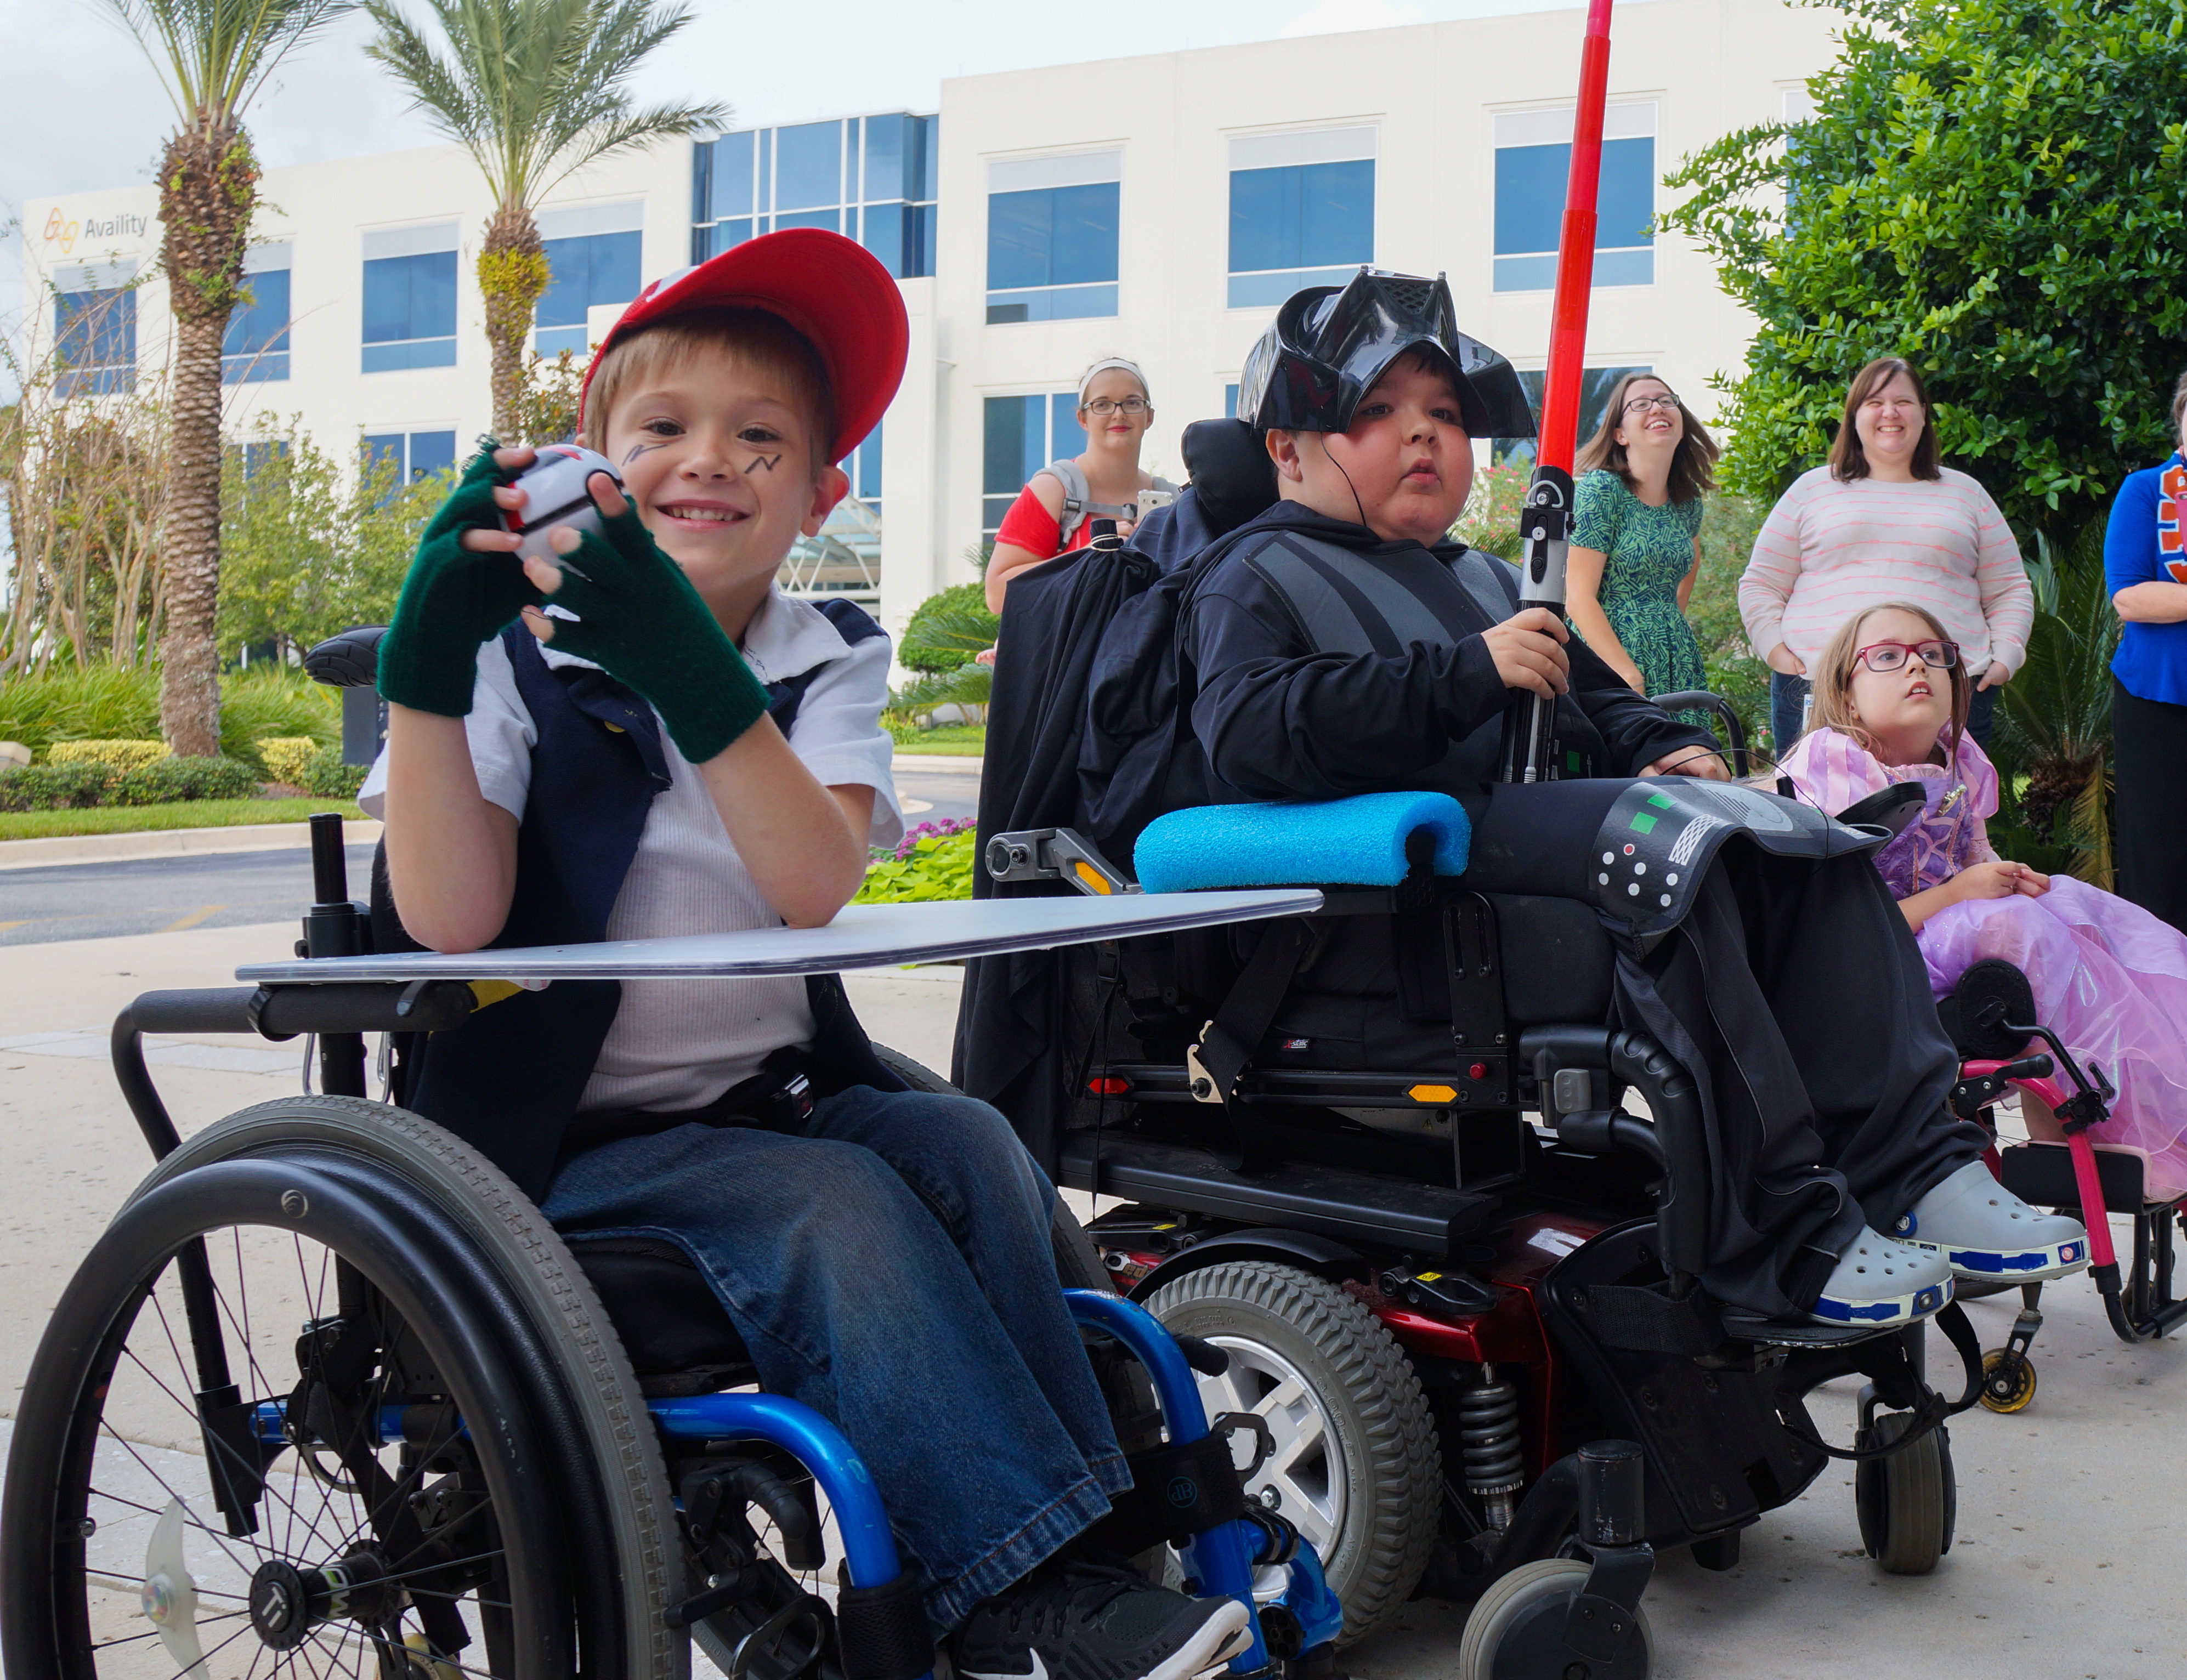 Kids in wheelchairs show off their Halloween costumes